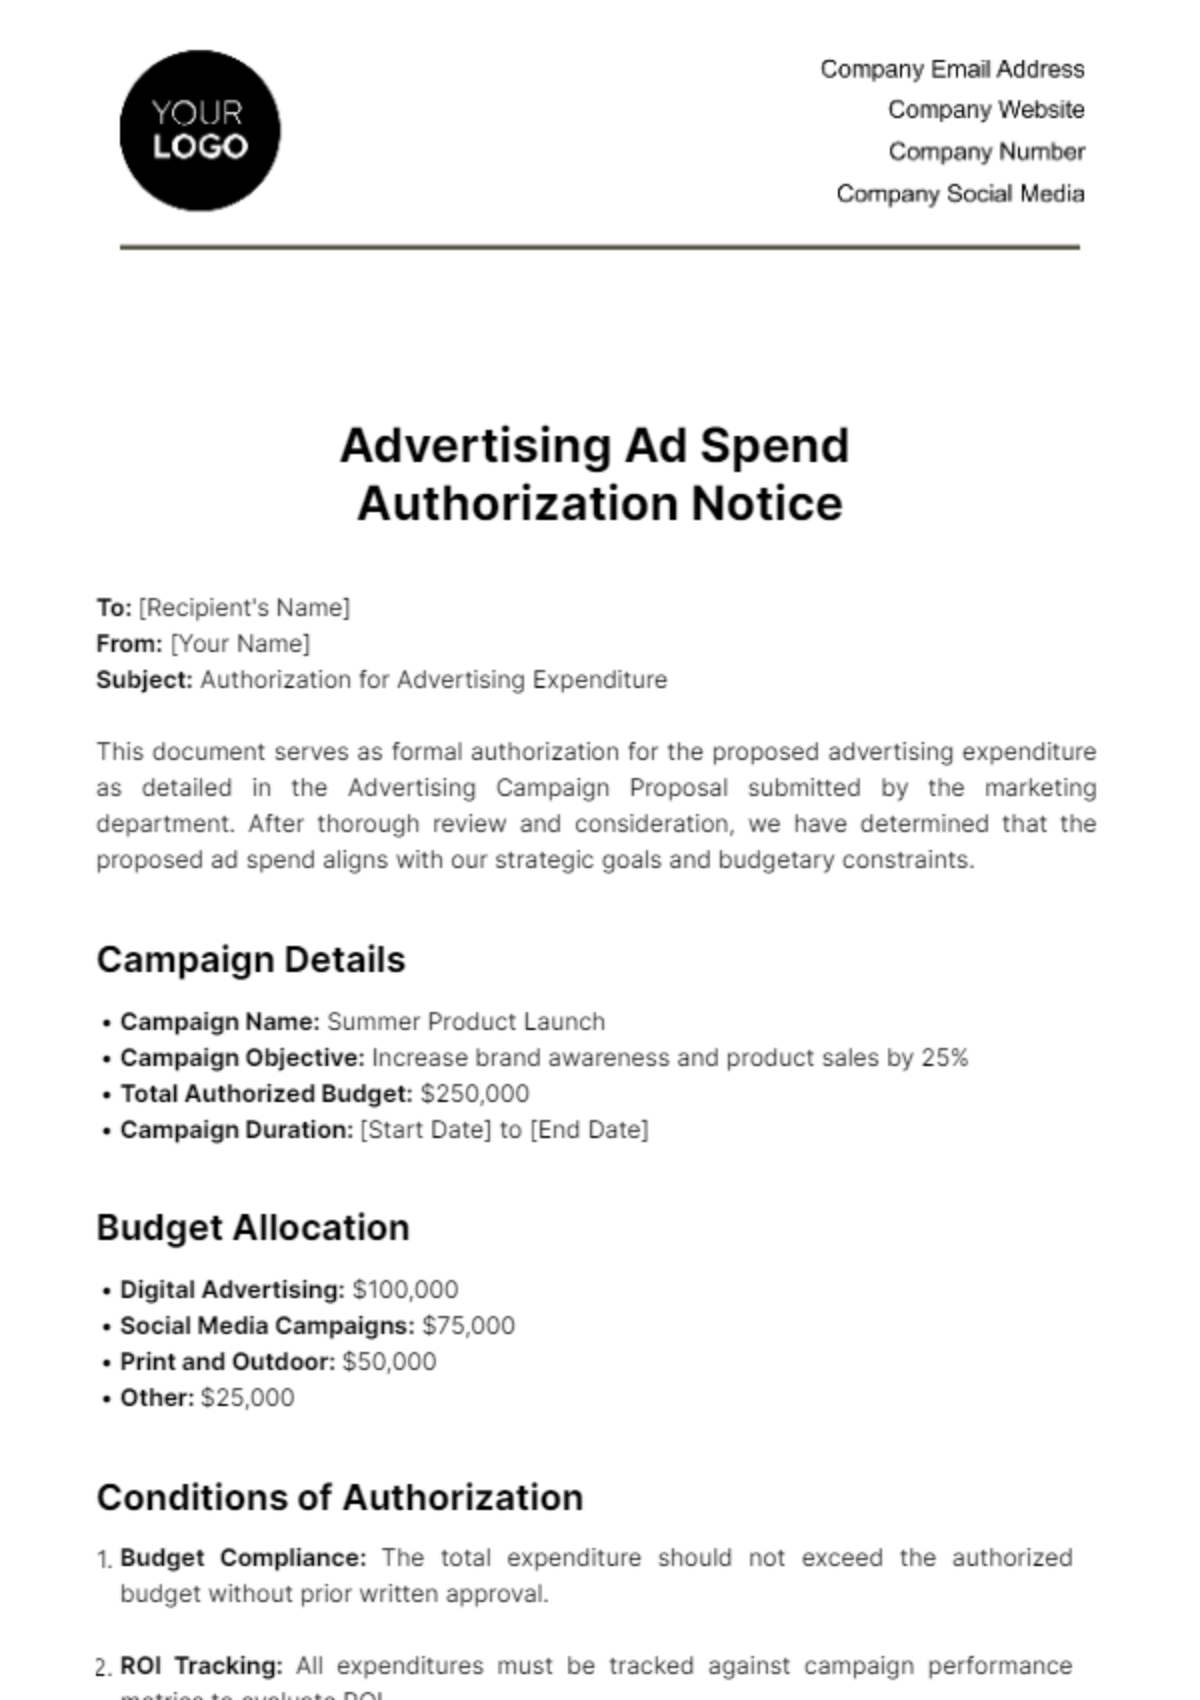 Advertising Ad Spend Authorization Notice Template